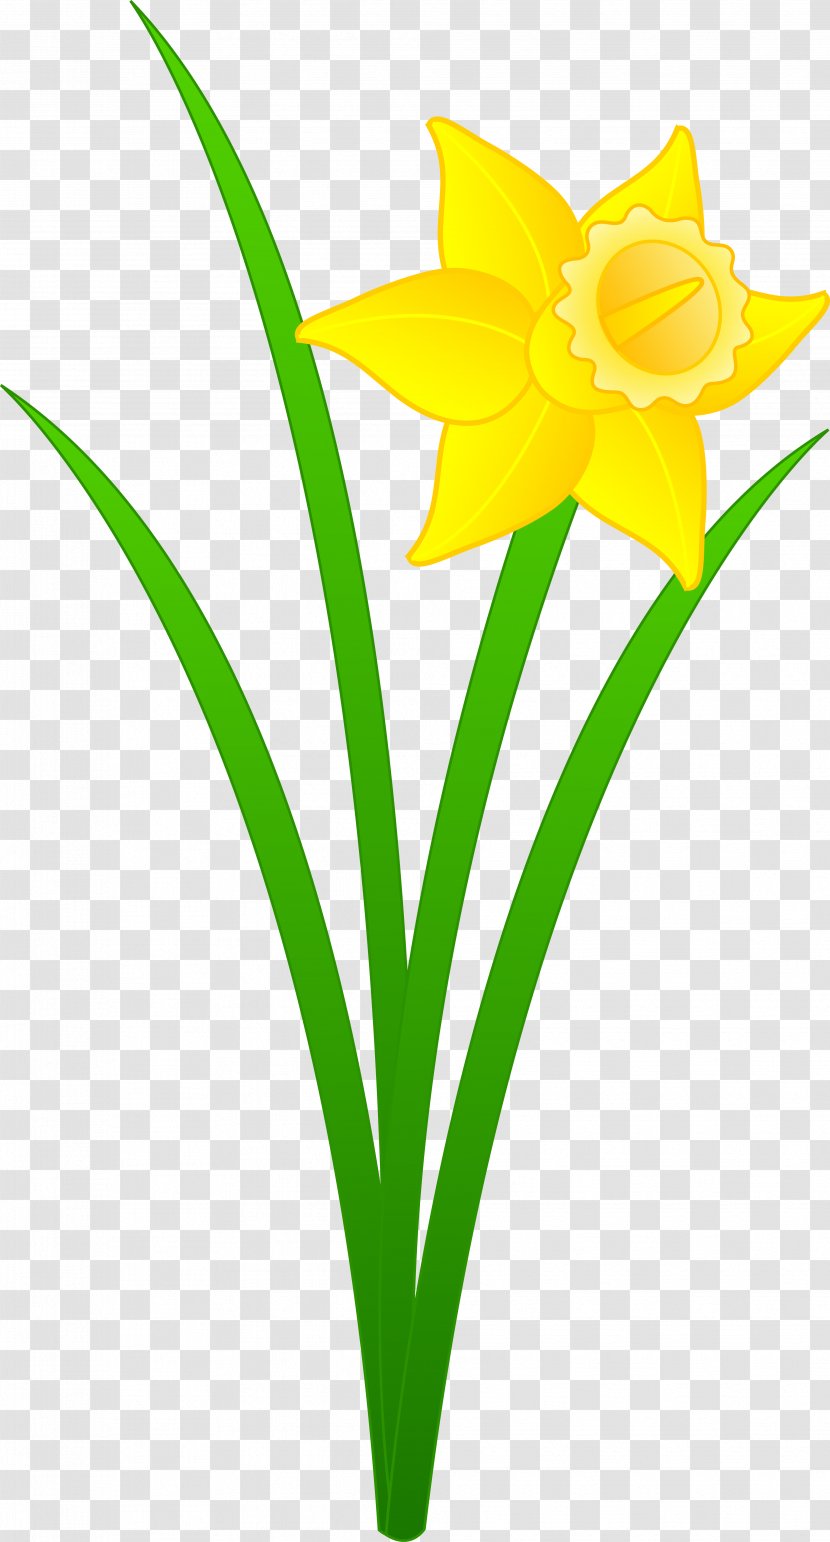 Daffodil Free Content Clip Art - Seed Plant - Flowers Clipart Transparent PNG